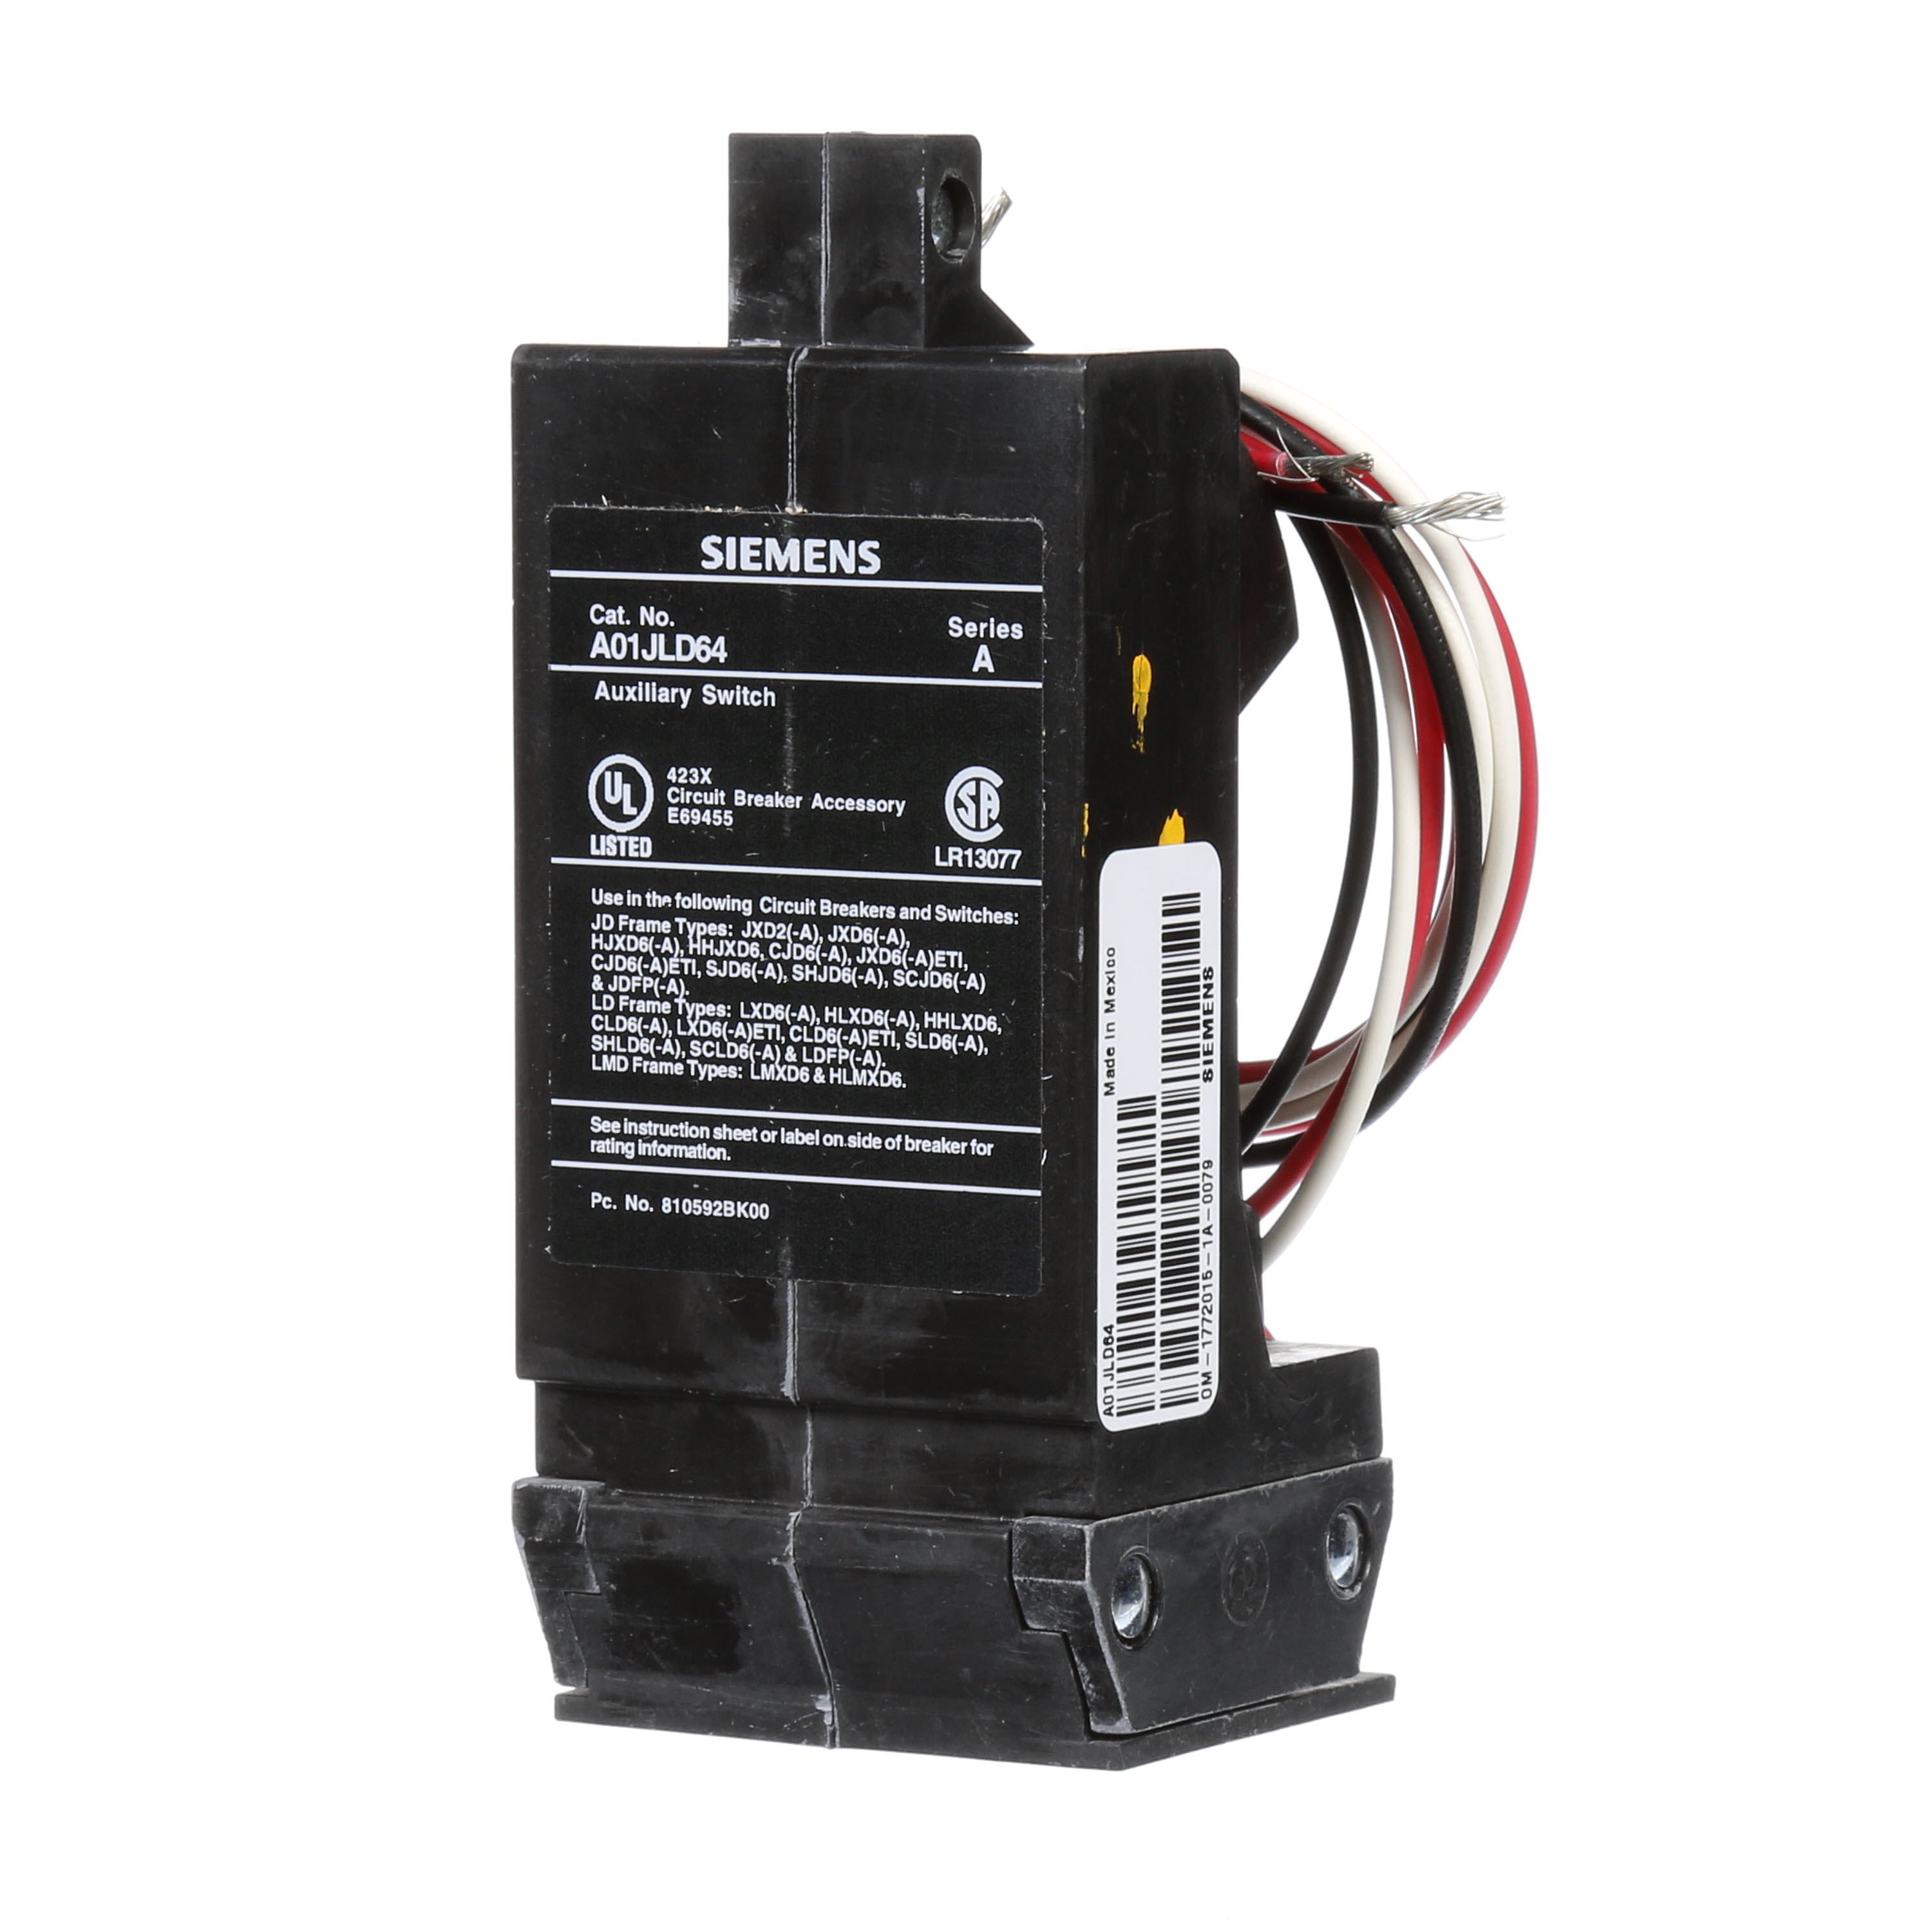 SIEMENS LOW VOLTAGE SENTRON MOLDED CASE CIRCUIT BREAKER INTERNAL ACCESSORY. FORM C 480 VAC AUXILIARY SWITCH (1NO / 1NC). SUITS JD / LD / LMD FRAME BREAKERS.